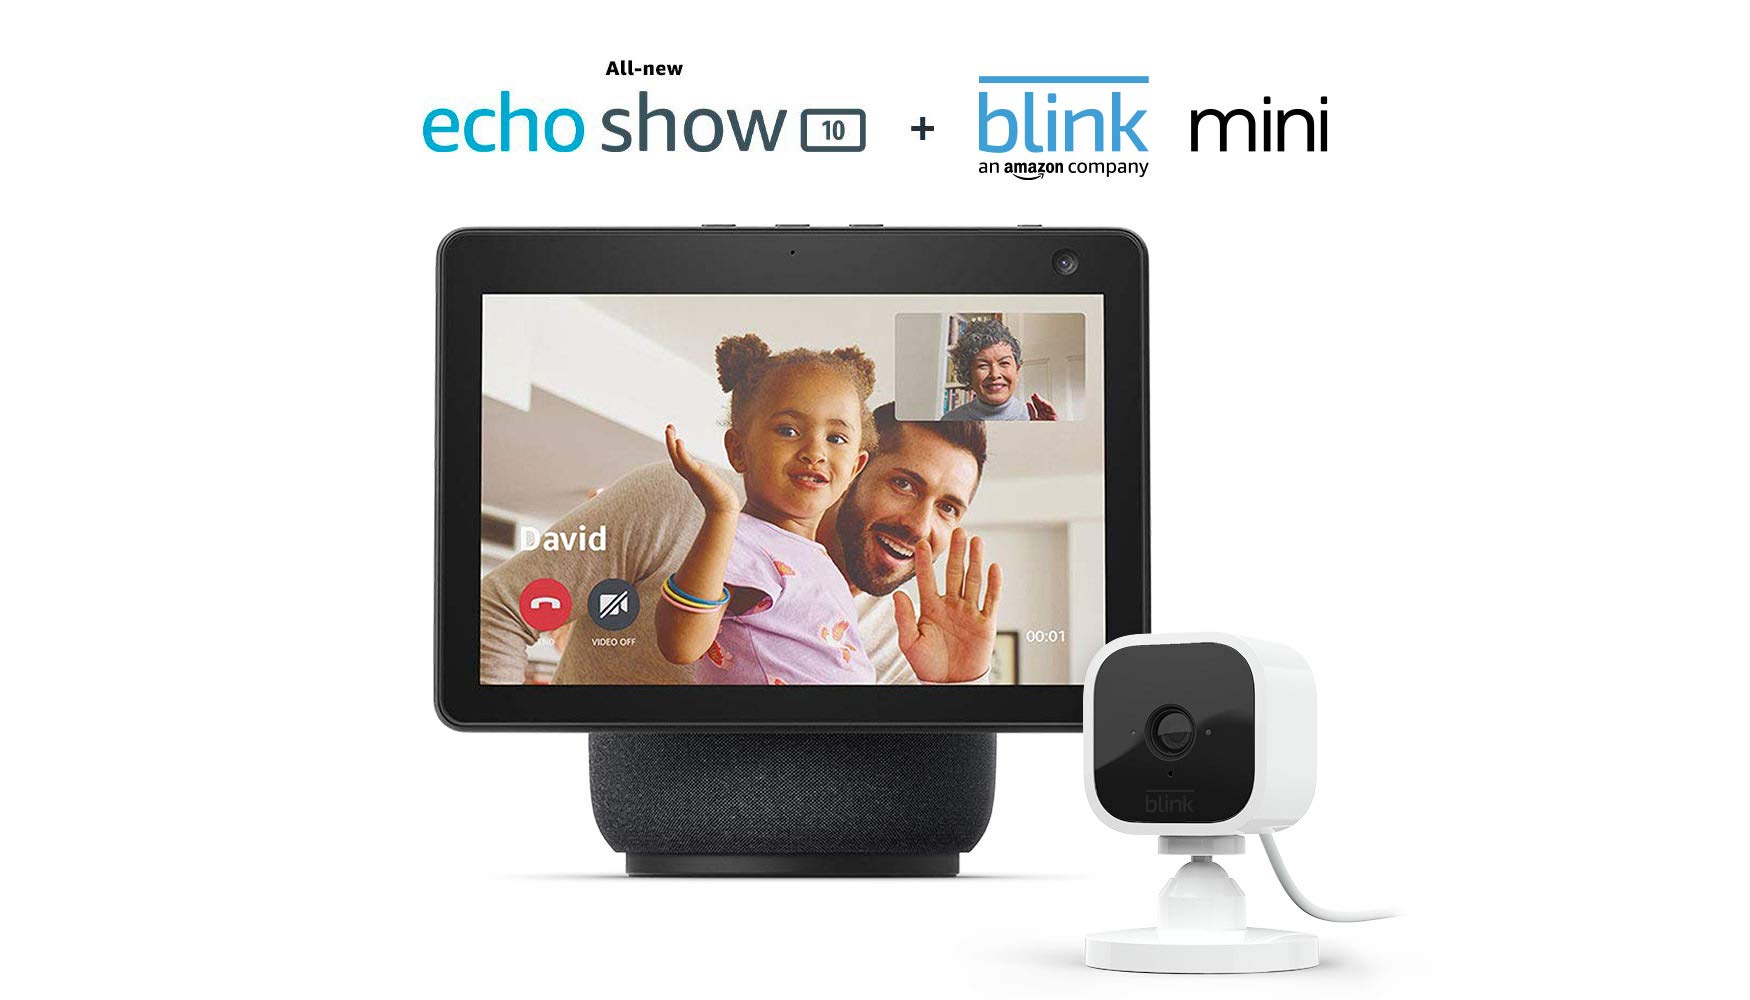 Echo Show 10 (3rd Gen) | Charcoal with Blink Mini Indoor Smart Security Camera, 1080 HD with Motion Detection